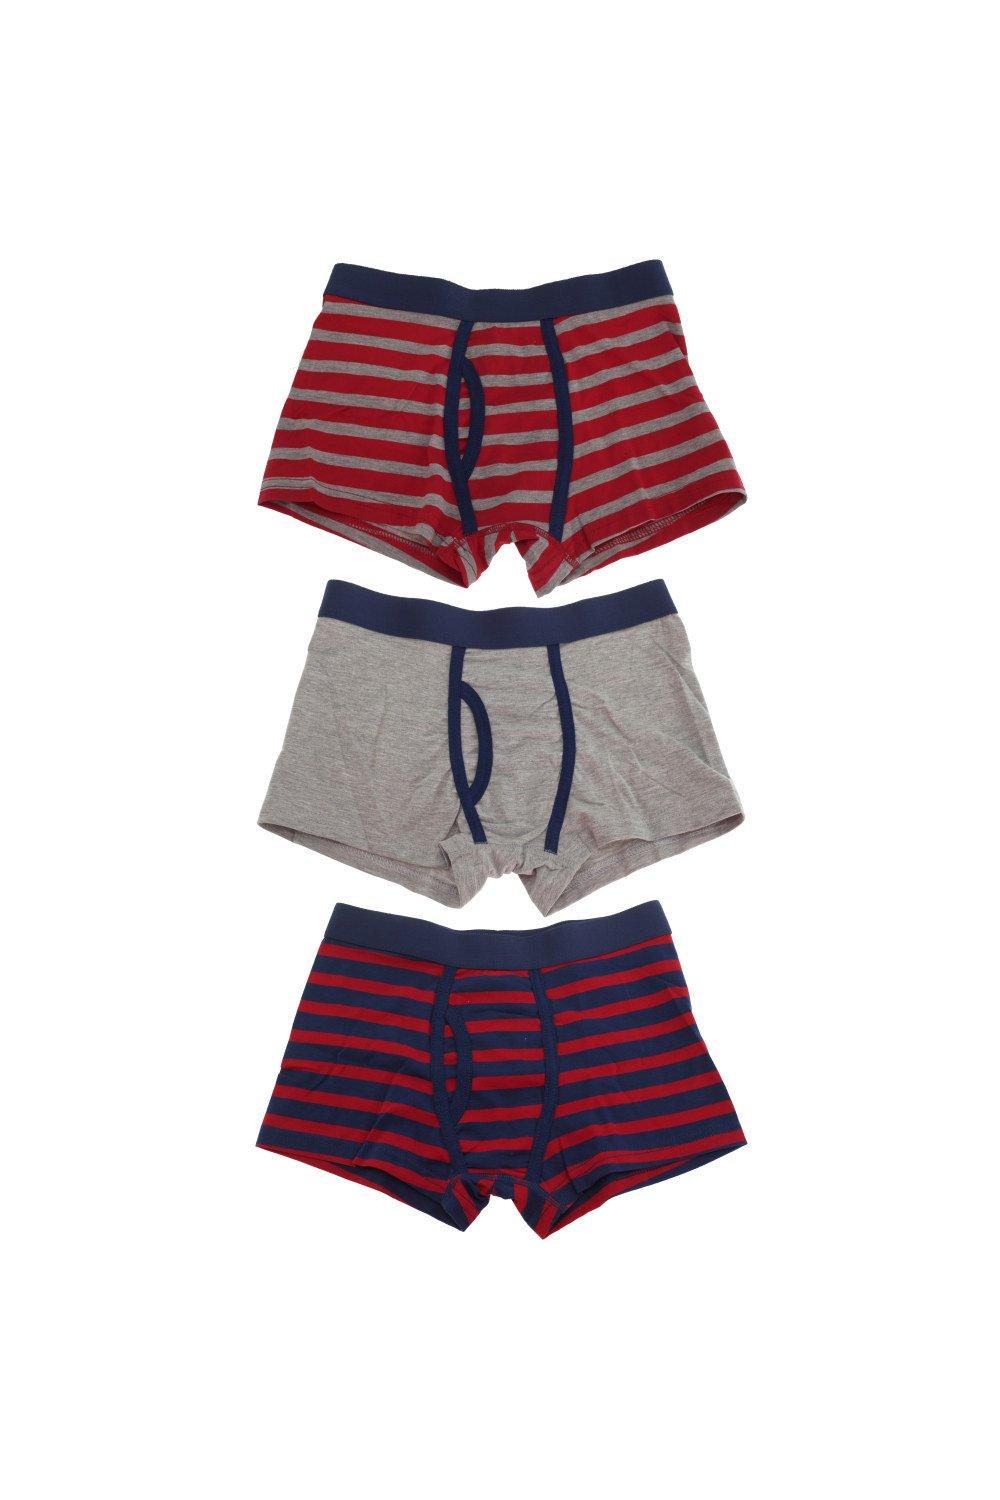 Trunks With Keyhole Underwear (3 Pack)